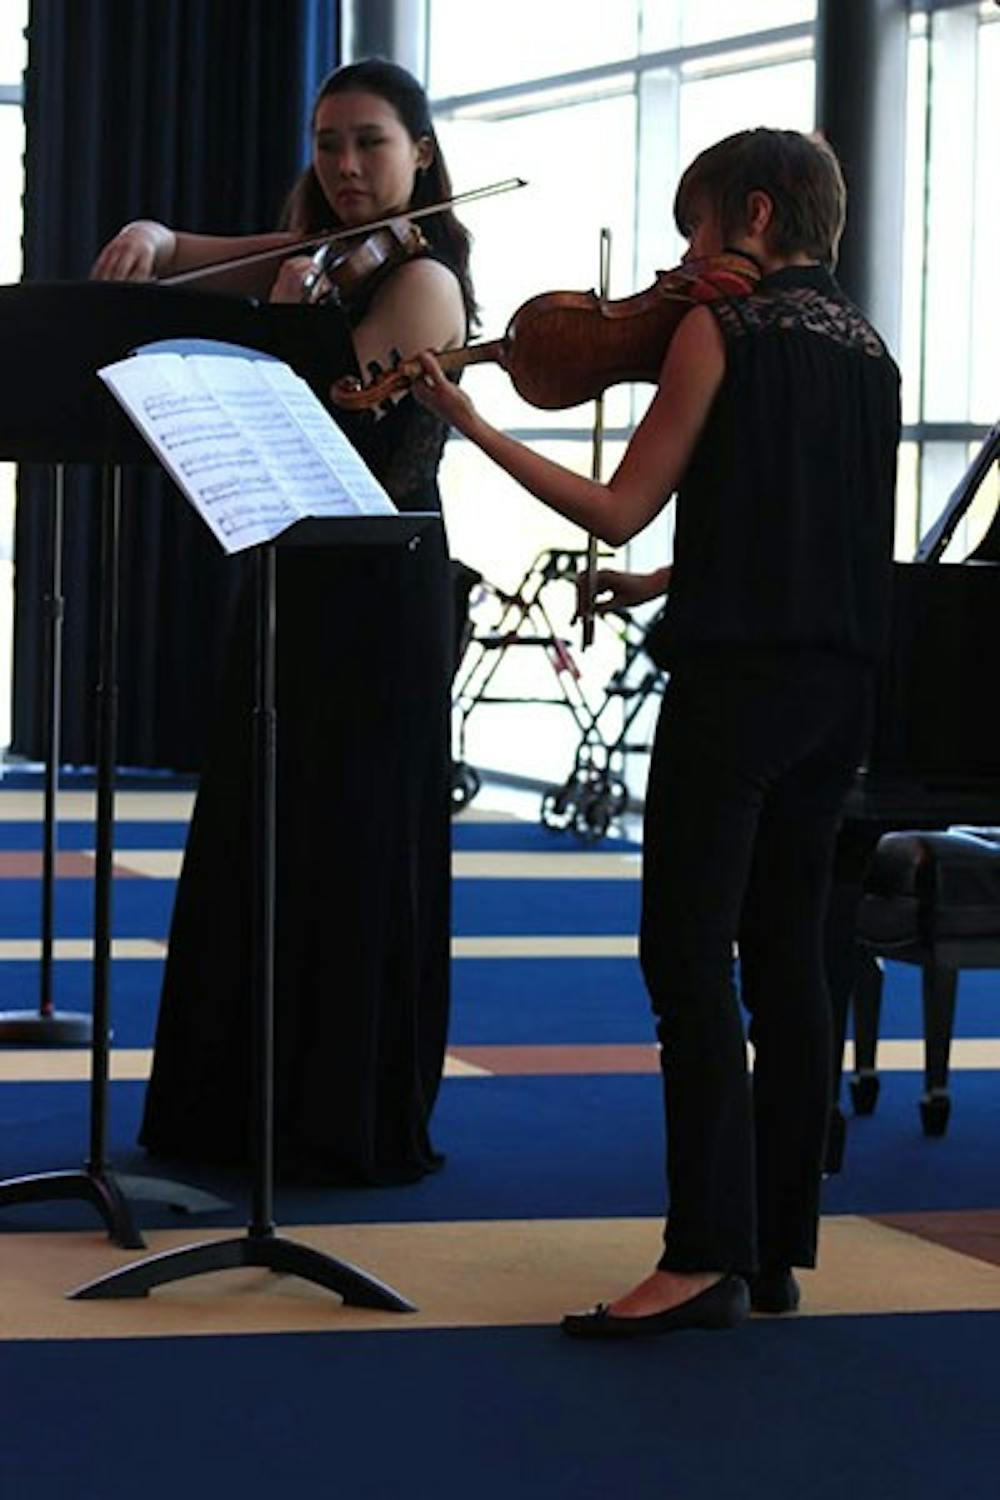 Violin performance sophomores Xiangyuan Huang and Clarice Collins perform at the Tempe Center for the Arts. The two violinists performed Prokofiev’s Sonata for Two Violins. (Photo by Micaela Rodriguez)